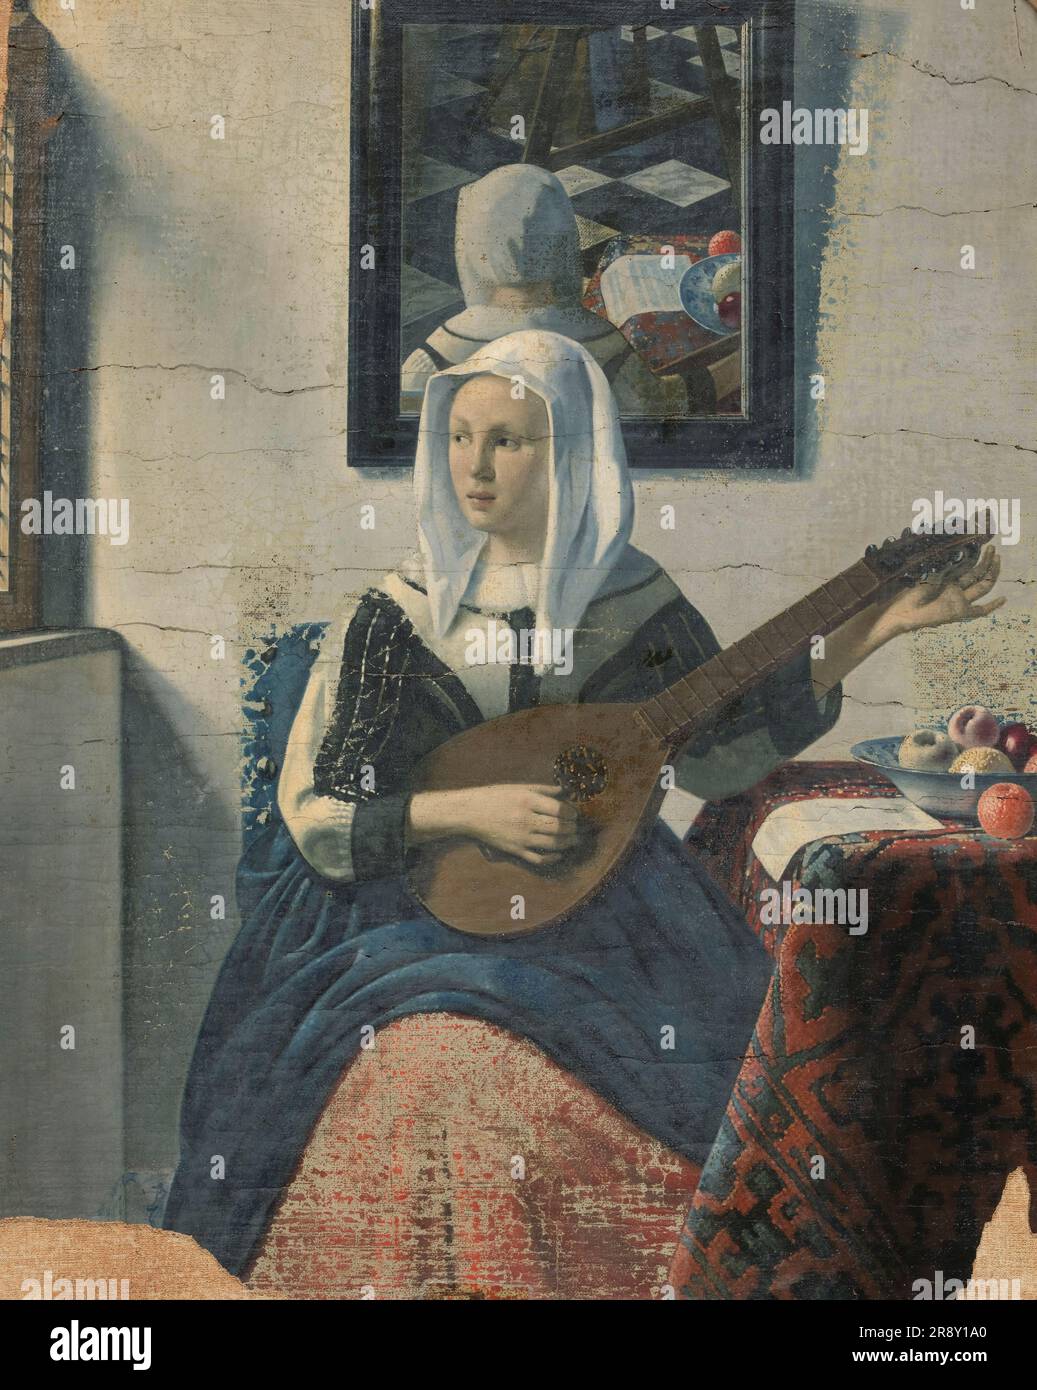 Woman playing a cittern, 1930-1940. Seated woman reflected in the mirror on the wall behind her. Painted in the style of Johannes Vermeer. Henricus Antonius van Meegeren was a Dutch painter and portraitist, considered one of the most ingenious art forgers of the 20th century. He became a national hero after World War II when it was revealed that he had sold a forged painting to Reichsmarschall Hermann G&#xf6;ring during the Nazi occupation of the Netherlands. Stock Photo